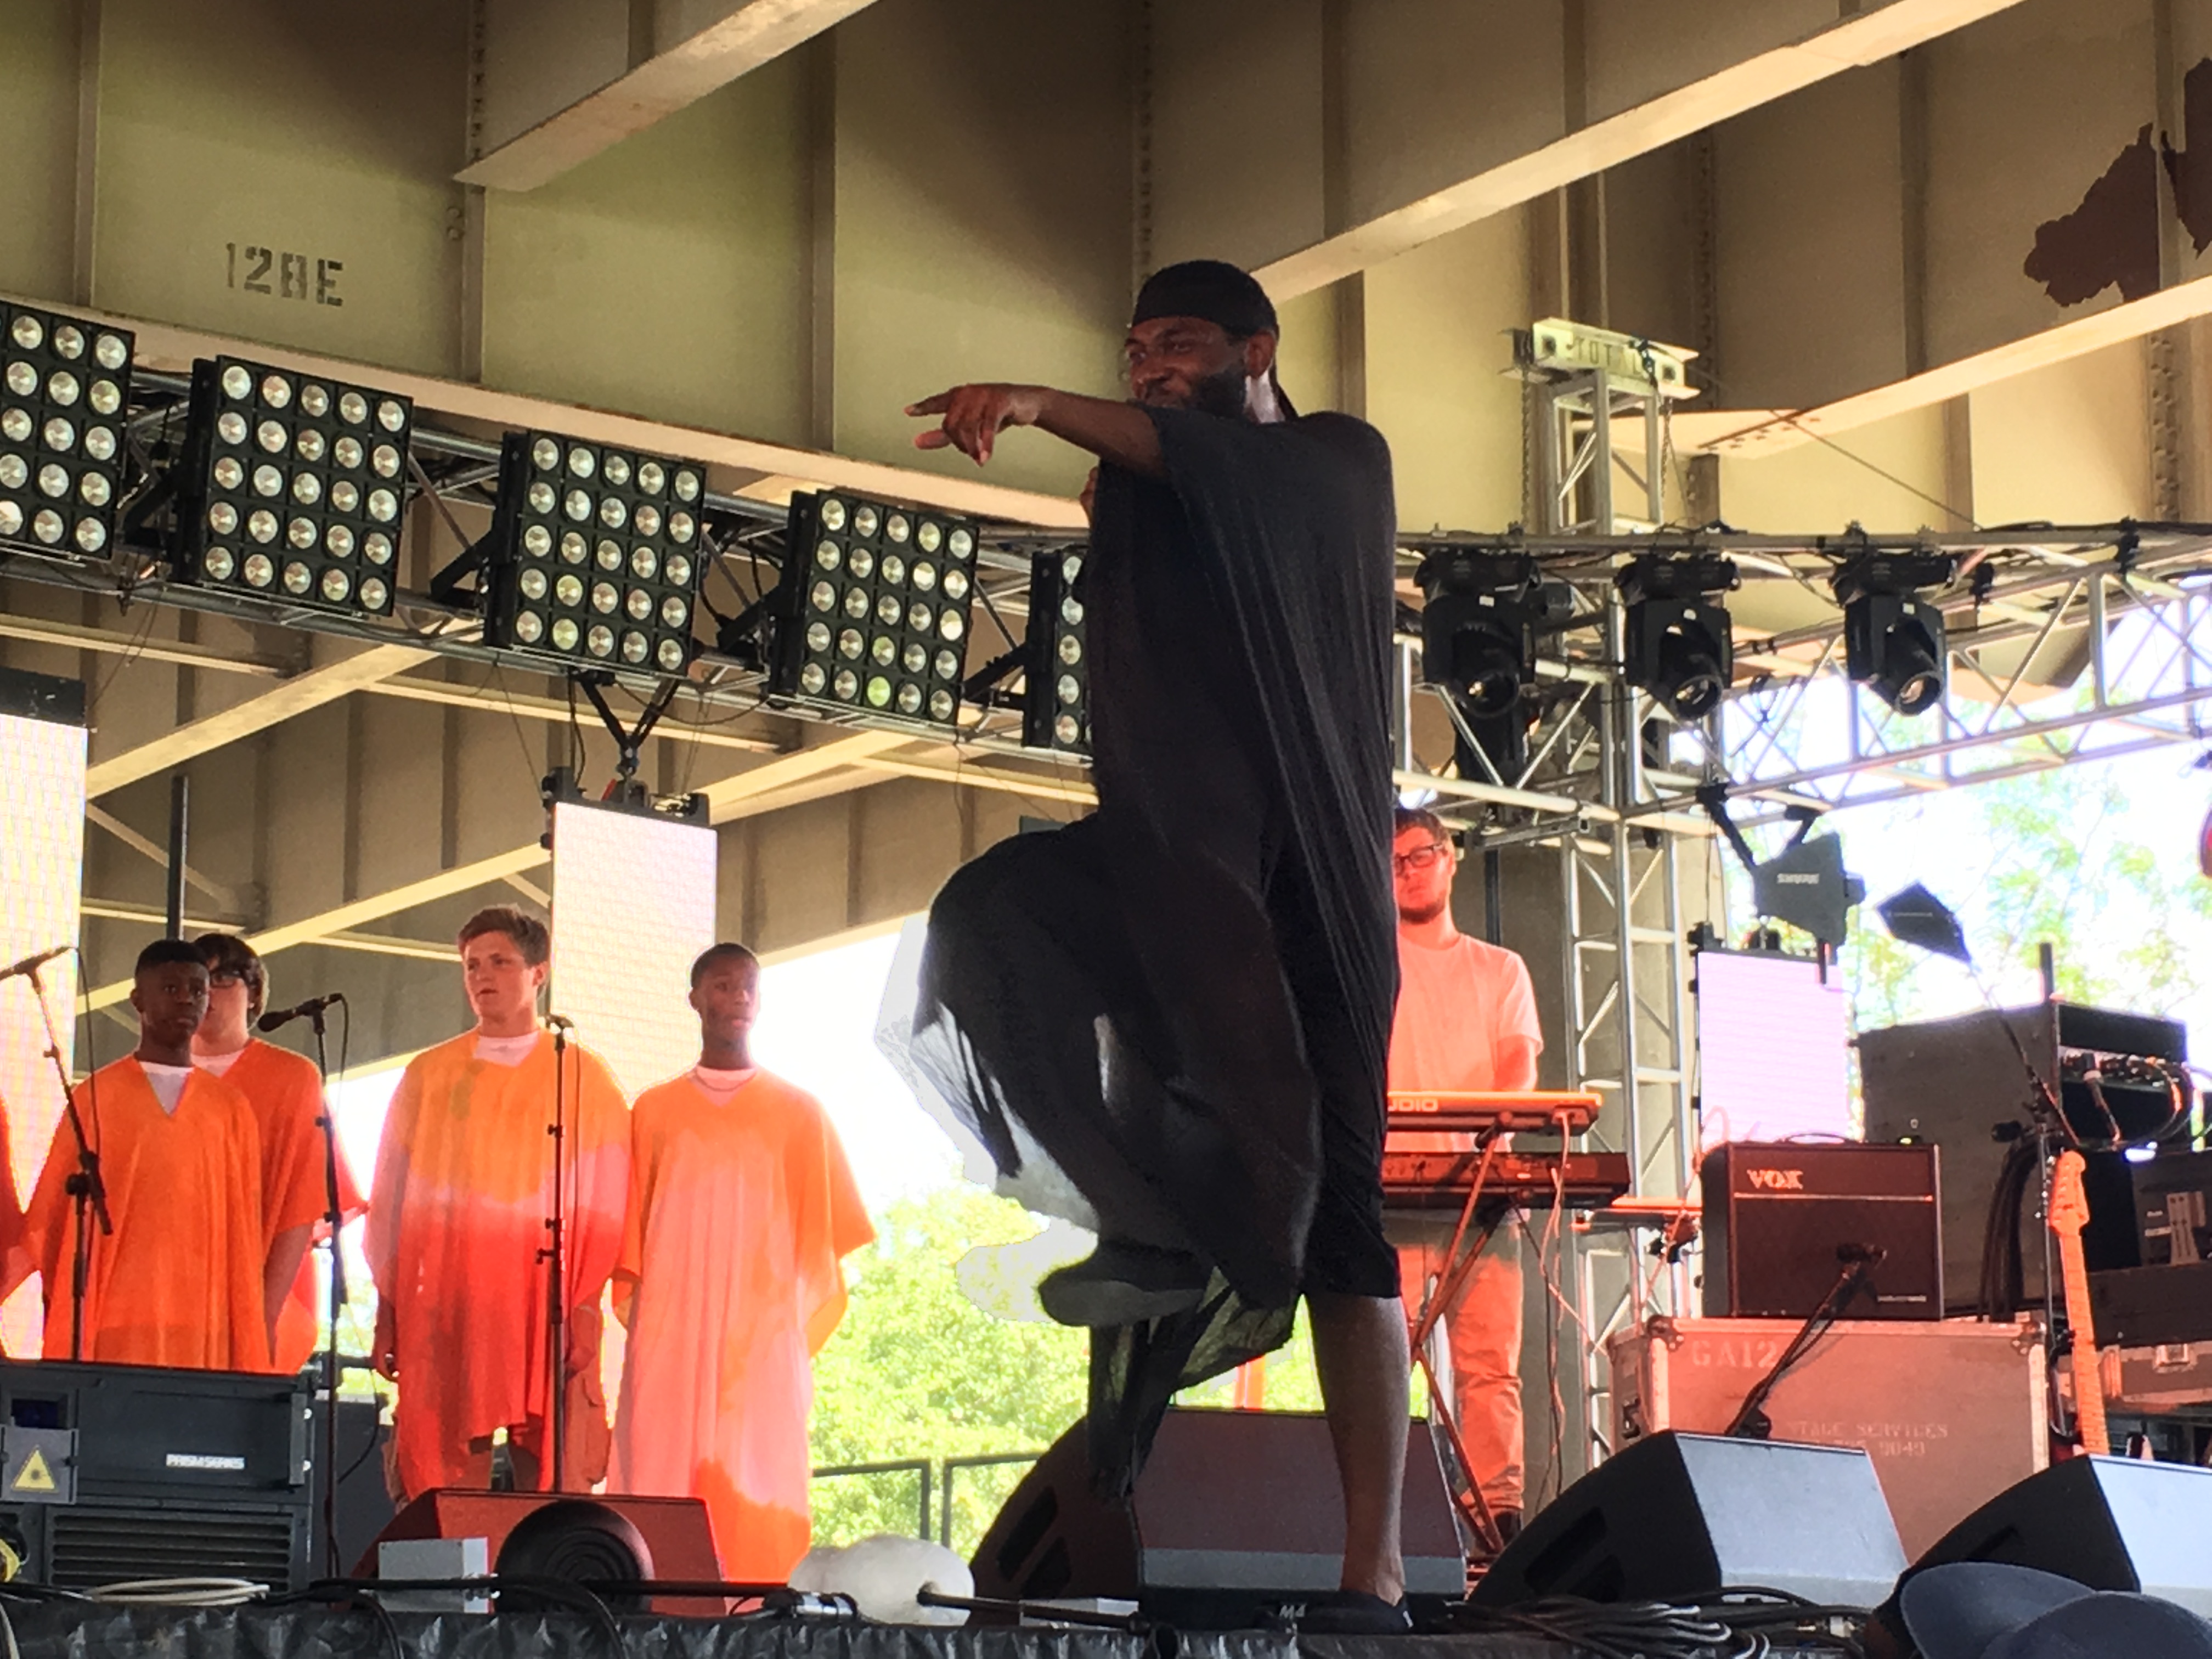 Local rapper and school teacher, 1200, gives an electrifying performance to open Forecastle. All the feels when he addressed each choir student by name  on stage